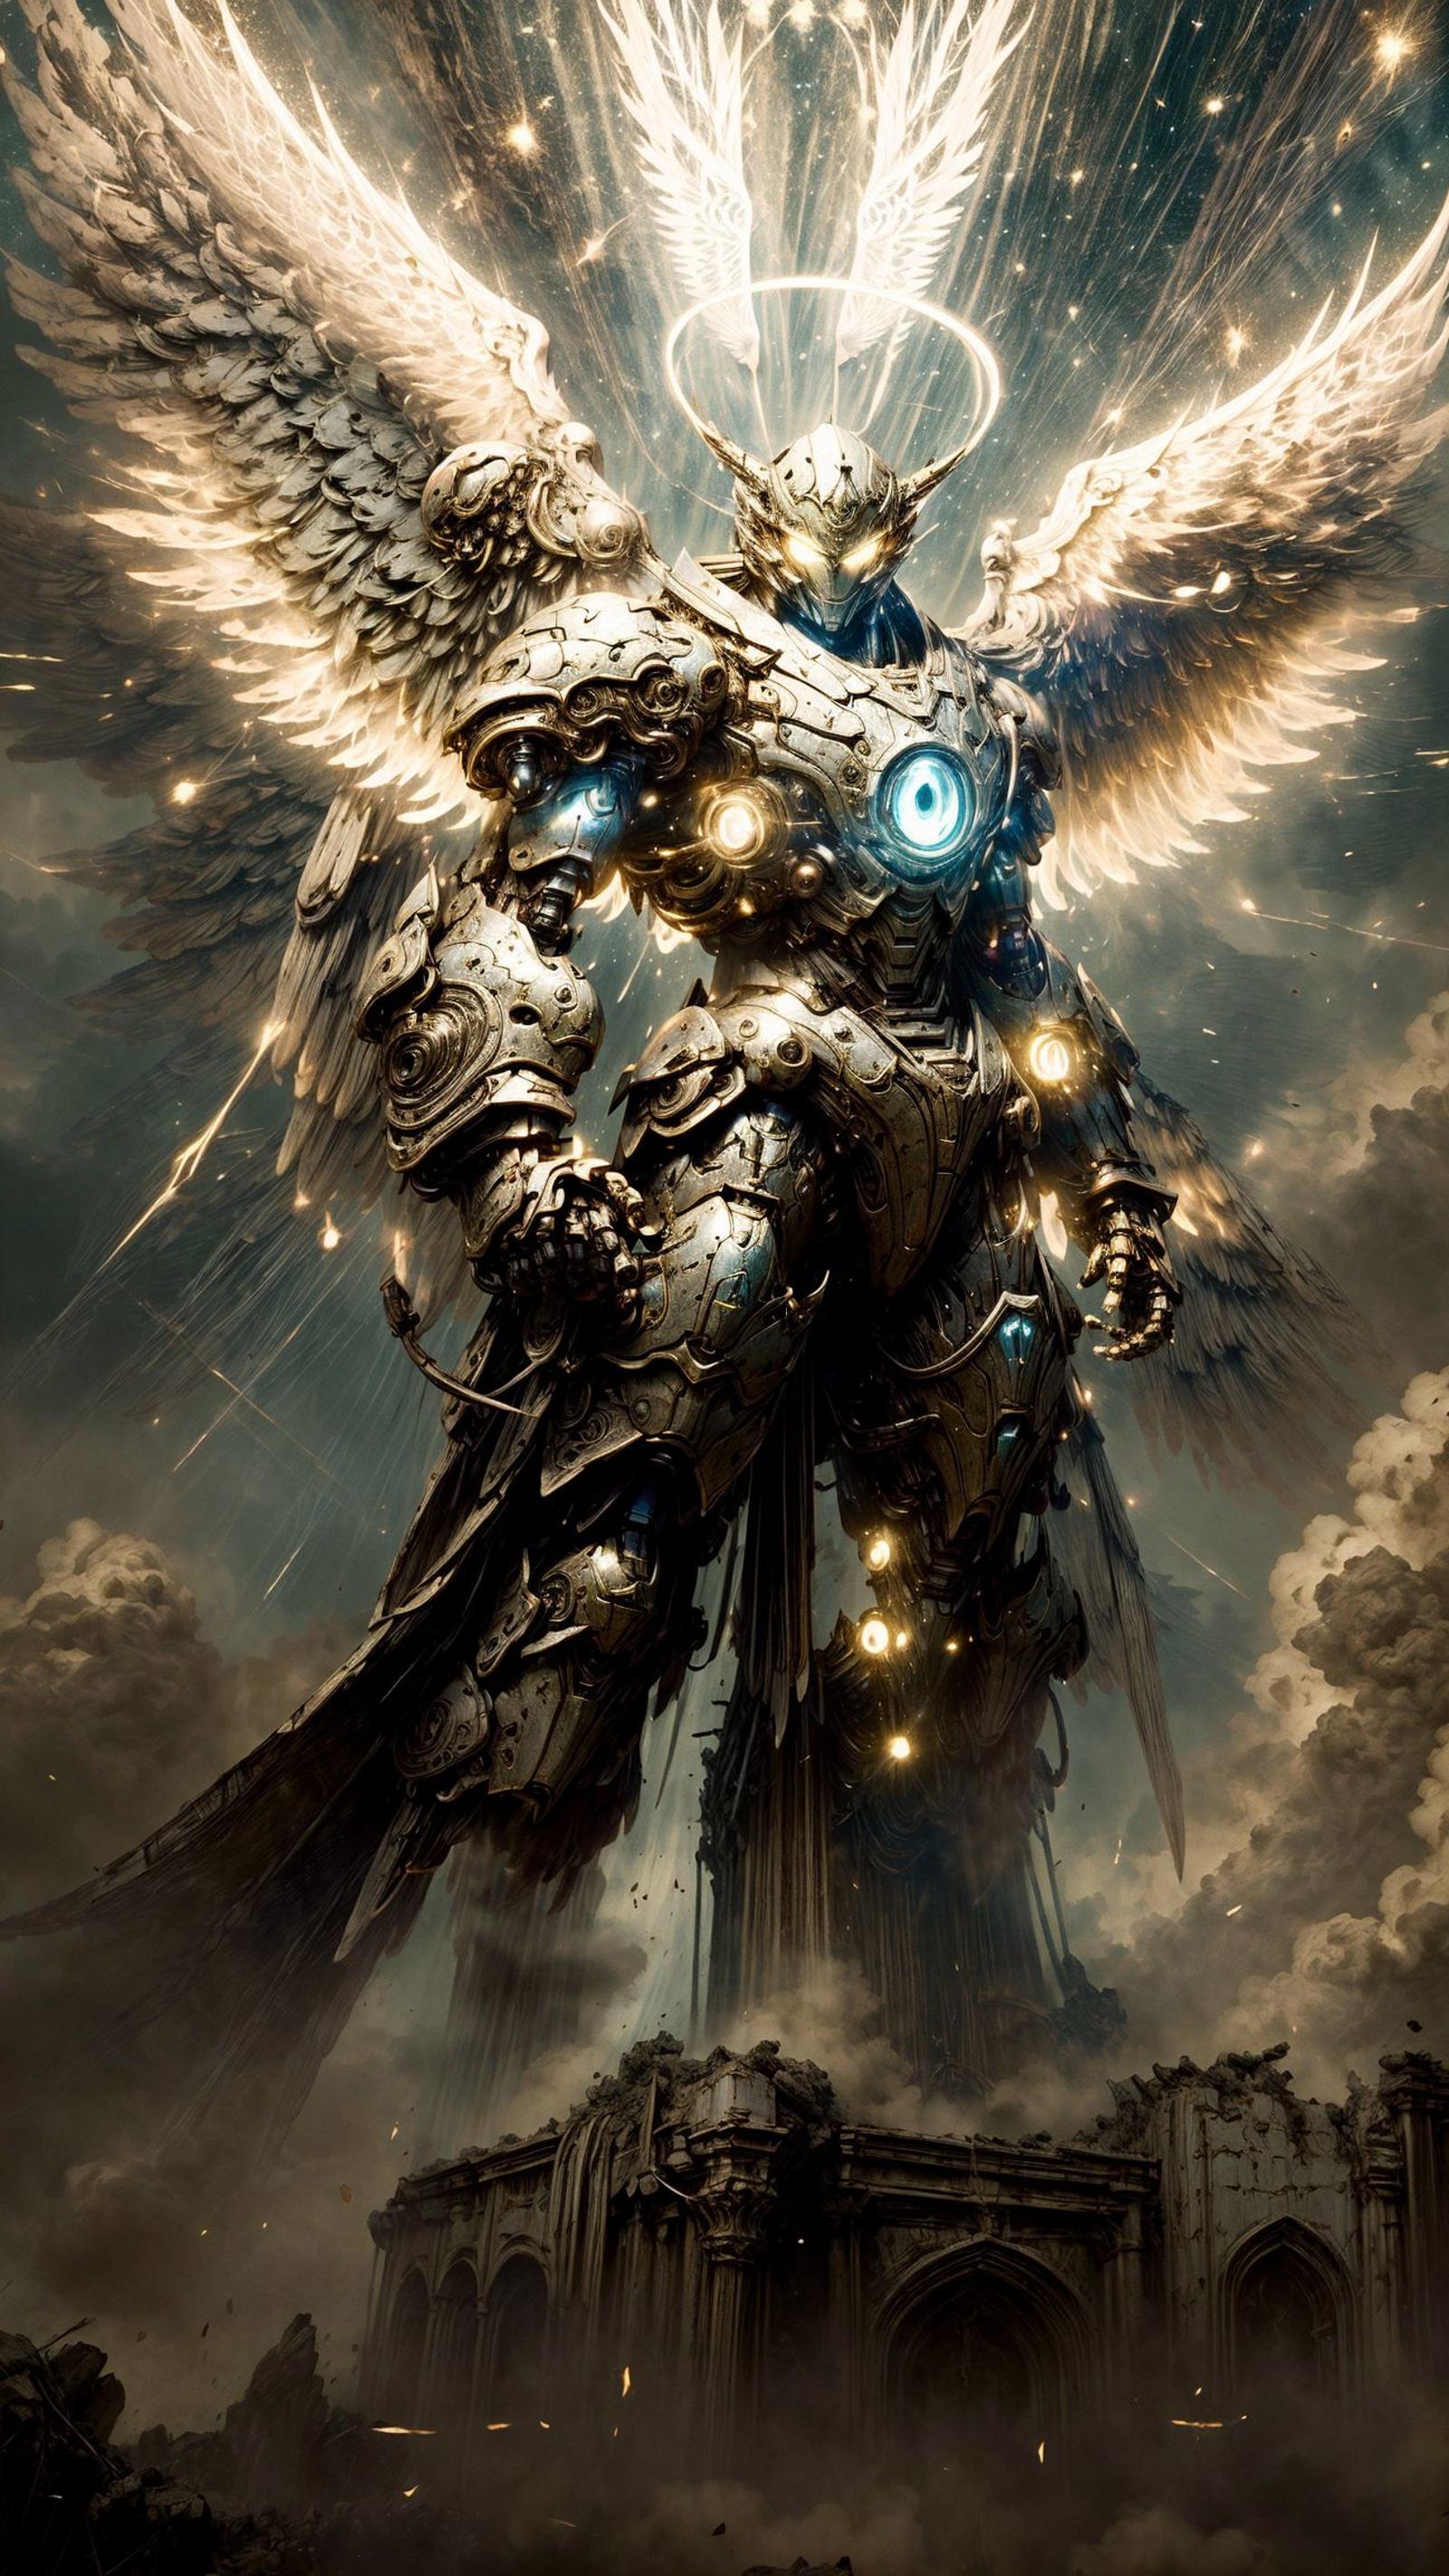 A robotic angel with wings and armor stands in the clouds.